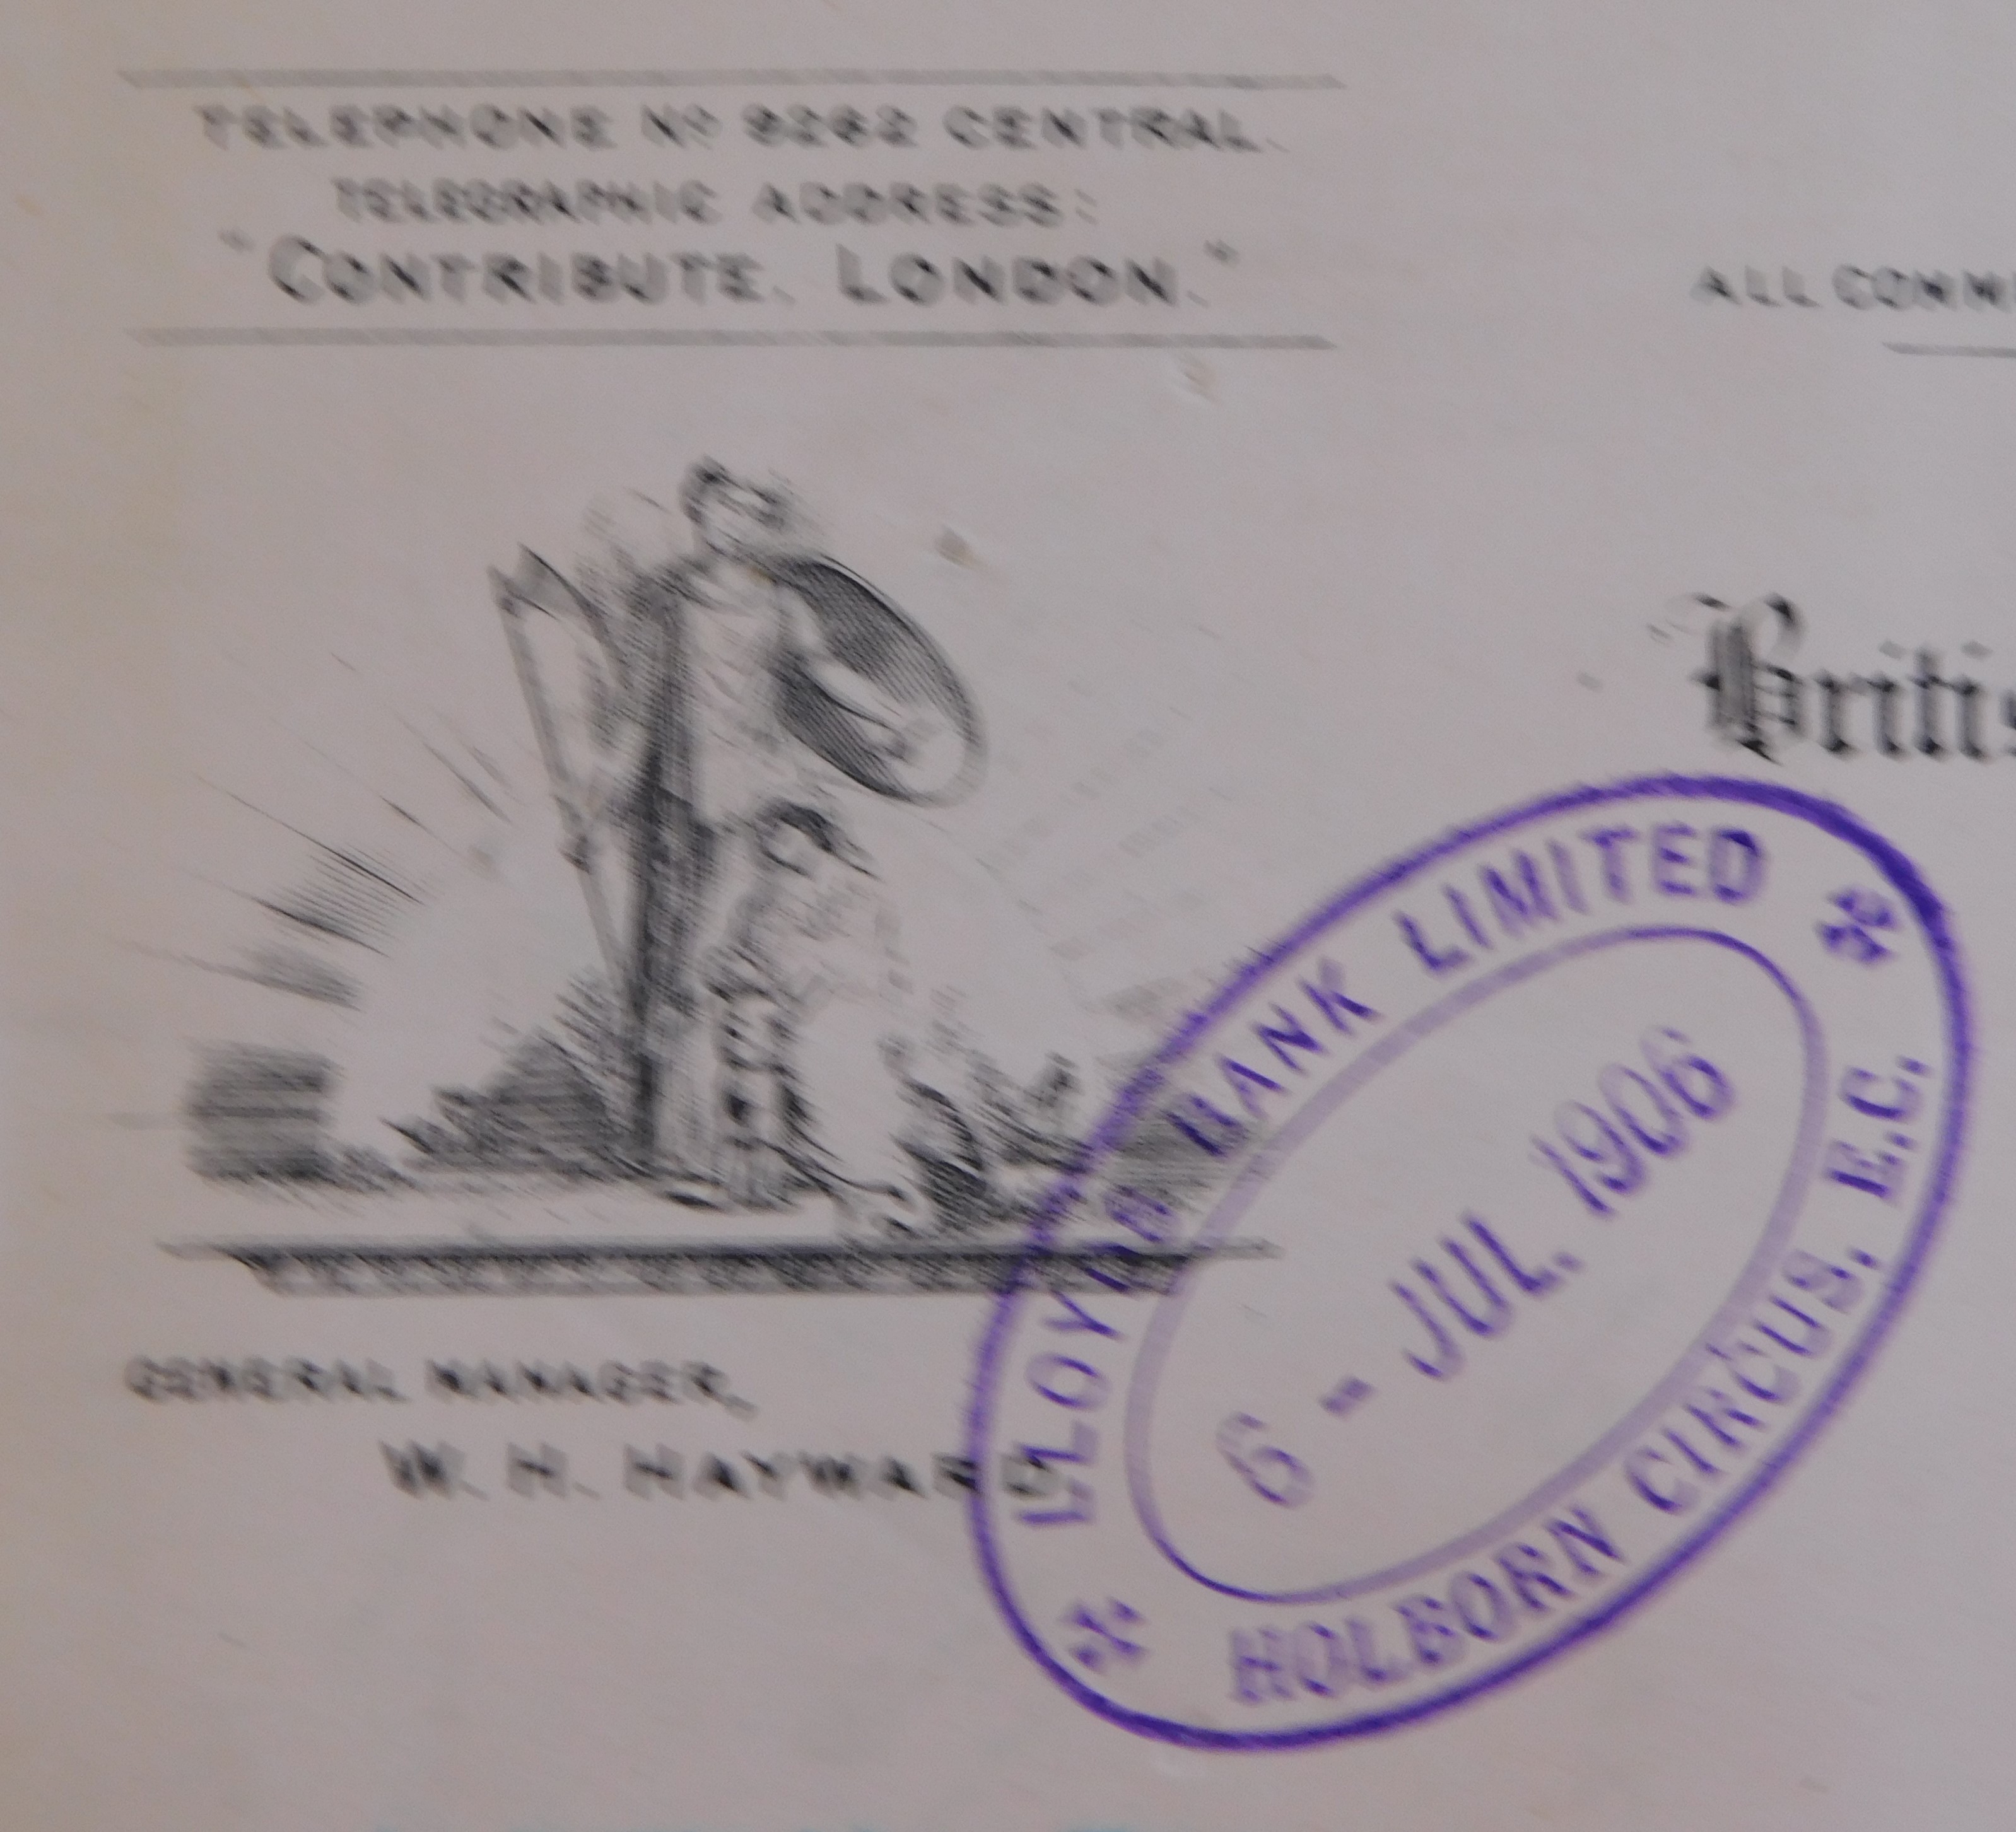 Insurance - 1901 British Natural Premium Life Insurance Association Limited. 1901 letter-headed - Image 3 of 3